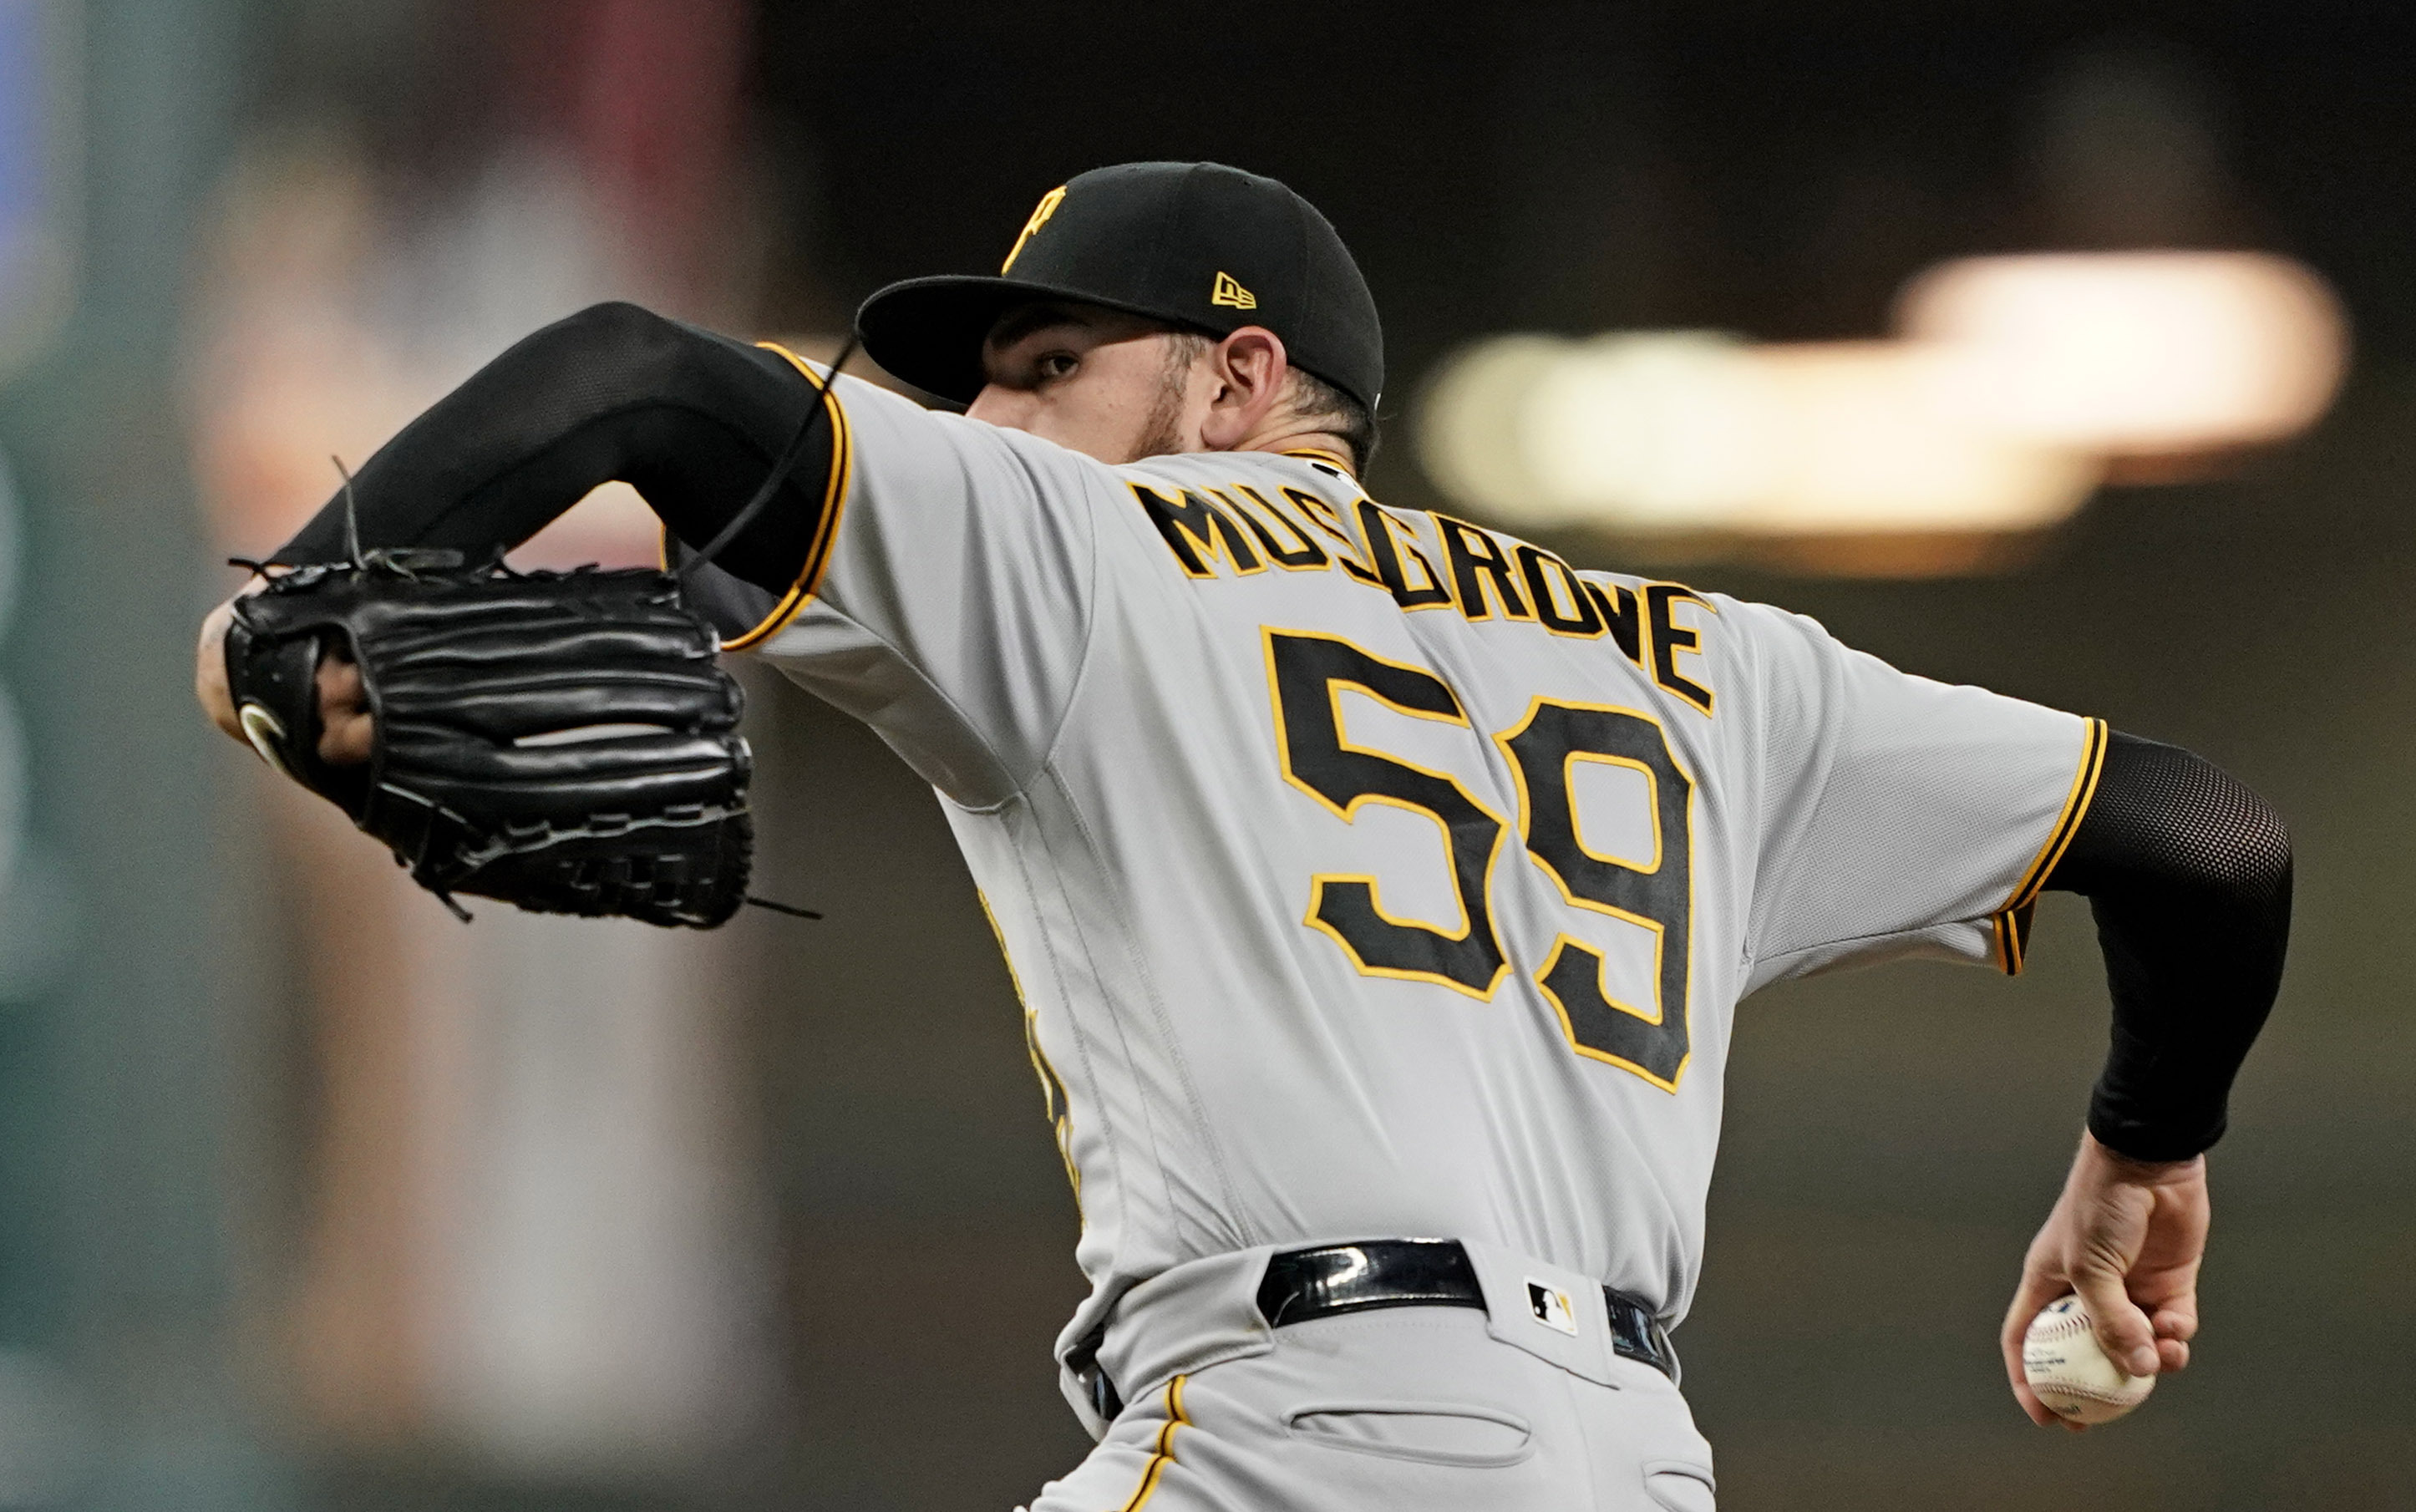 Bell homers again as Pirates cruise past Astros 10-0